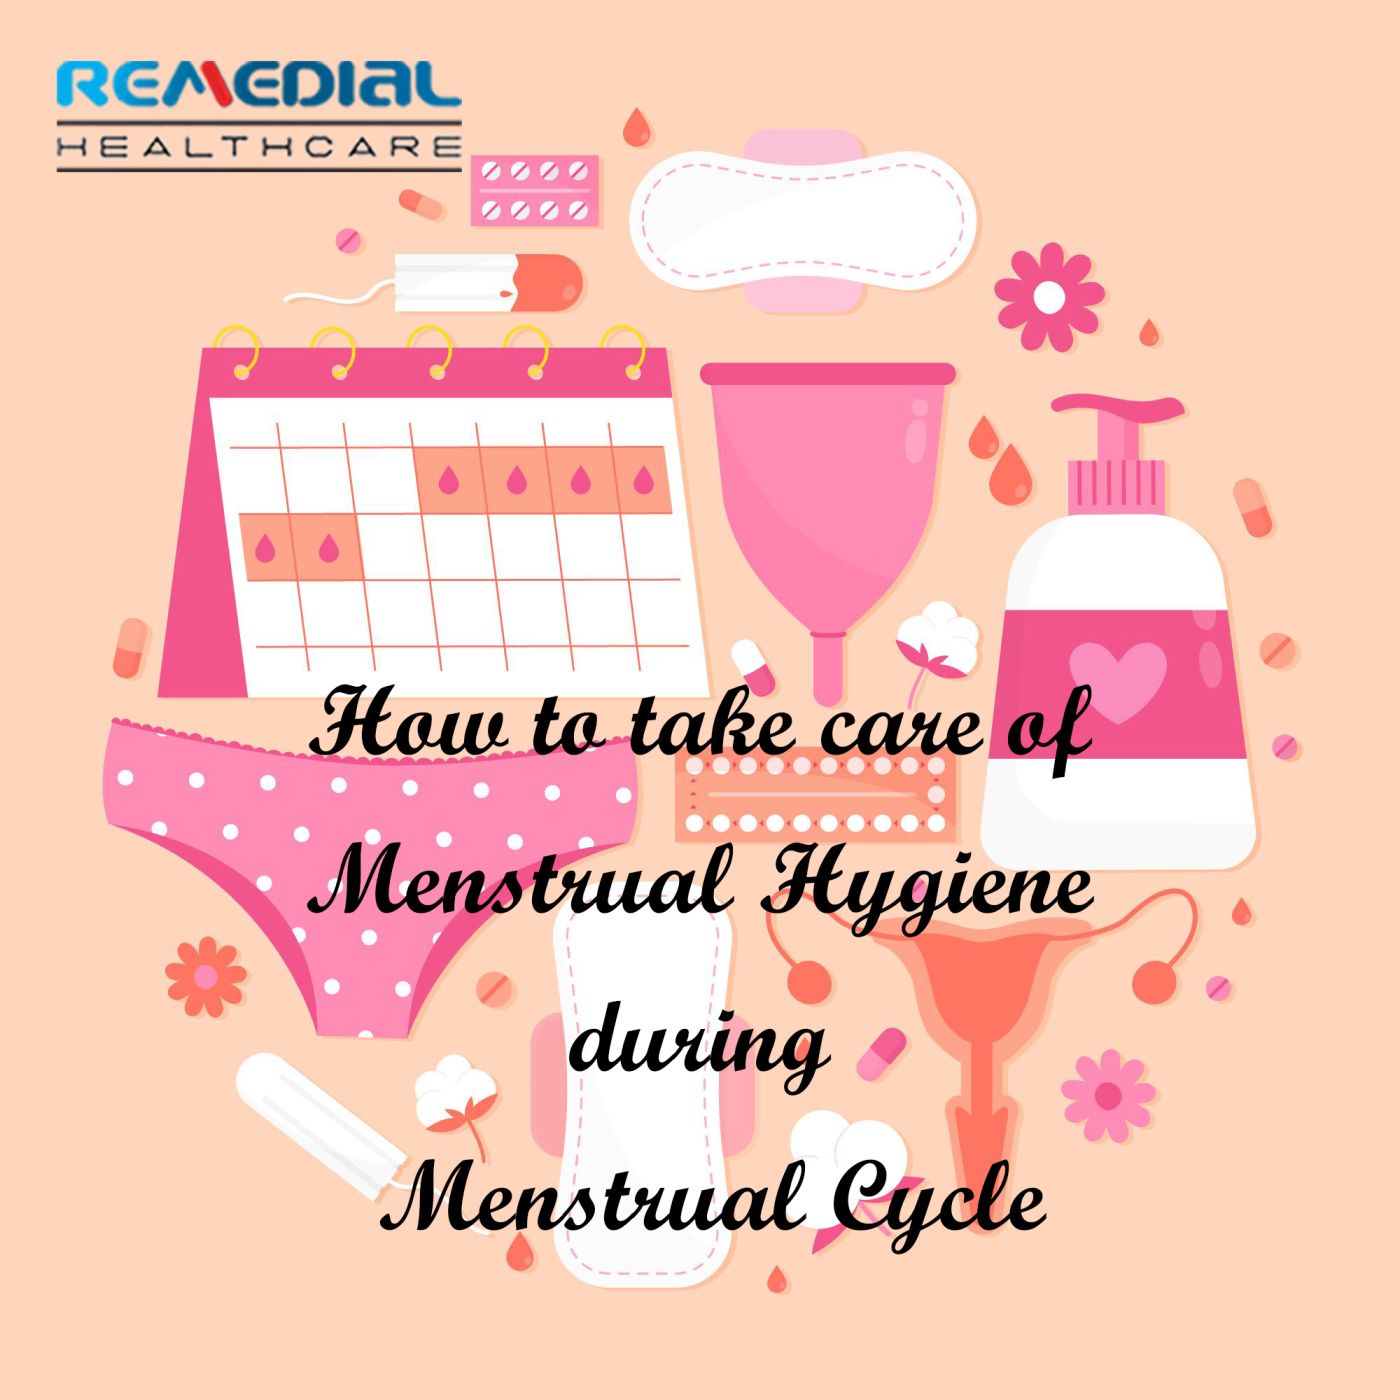 How to take care of Menstrual Hygiene during Menstrual Cycle